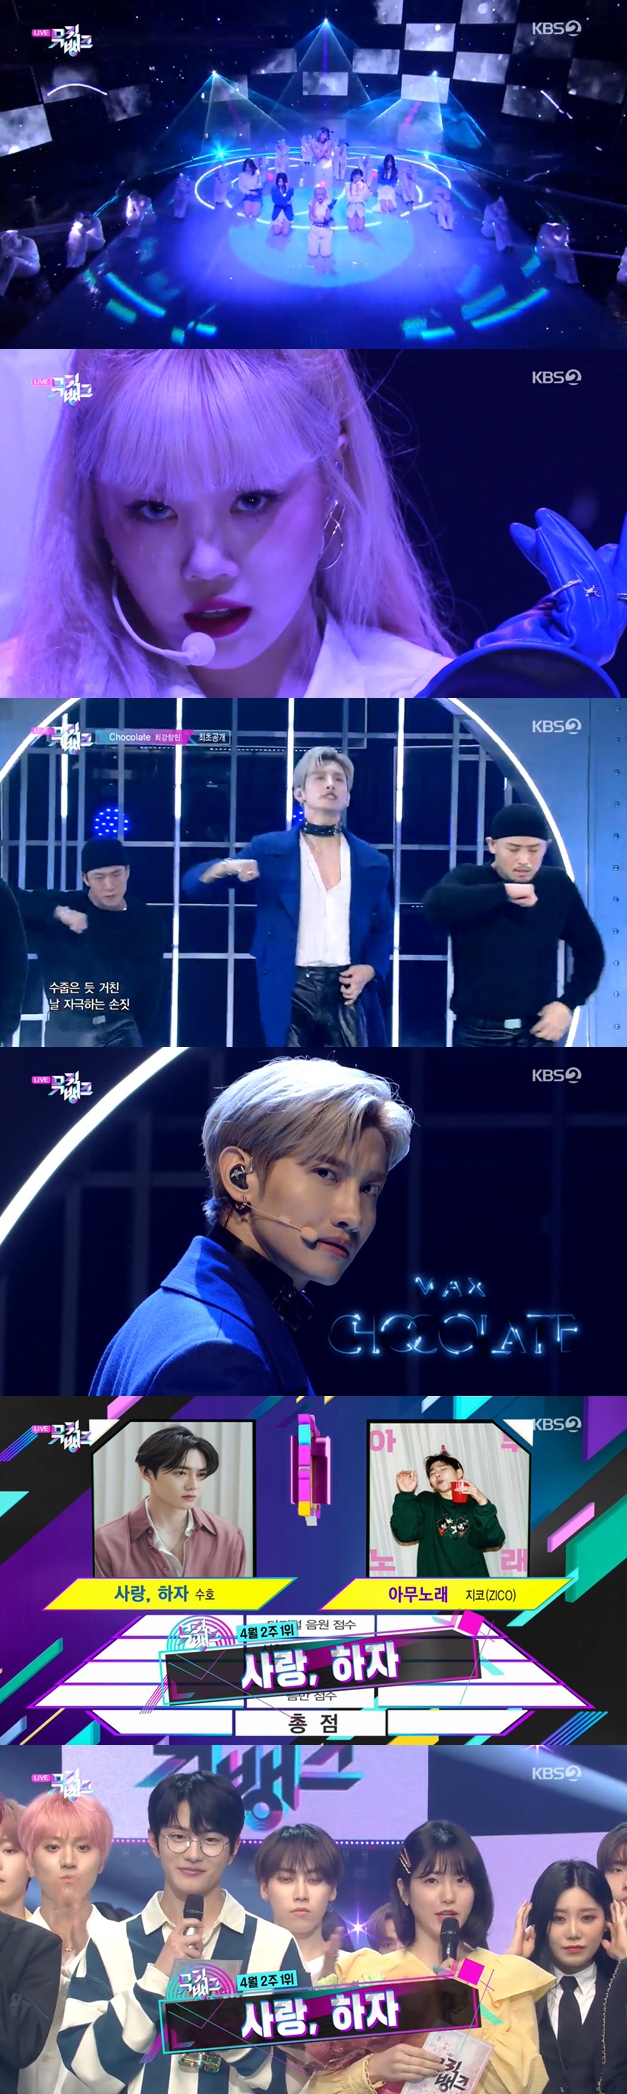 Suho of the group EXO took the top spot without an appearance.In KBS 2TV Music Bank broadcast on the 10th, EXO Suhos Love, Hazard and Zicos No Song each became the first candidates in the second week of April, while the first trophy went to Suho.Suhos title song Love, Let is a song of modern rock genre with an impressive lyrical melody and warm atmosphere. It is composed of lyrics that express love by courageously and lacking in expressing love.On the other hand, TVXQs Changmin stage, which returned to the new song Chocolate, was released for the first time.The title song Chocolate of the pop dance genre is a song that shows off its skillful yet sexy vocals.(Women) children made a comeback with Oh my god and set up a dreamy stage in intense sound: Oh my god is I believe in me (I trust).I can be proud just by believing in myself. On the other hand, Music Bank will include (girls) children, decoys, FAVORITE, HYNN (Park Hye-won), MCND, MY.st (mast), TOO (thio), Kang Go-eun, Leah, Black Six (BLACK6IX), Stella Jang, Signature, Alexa, One Earth (ONEUS), Changmin, Hong Eun-ki Hong Jin-yeong, and others.Photo: KBS 2TV screen